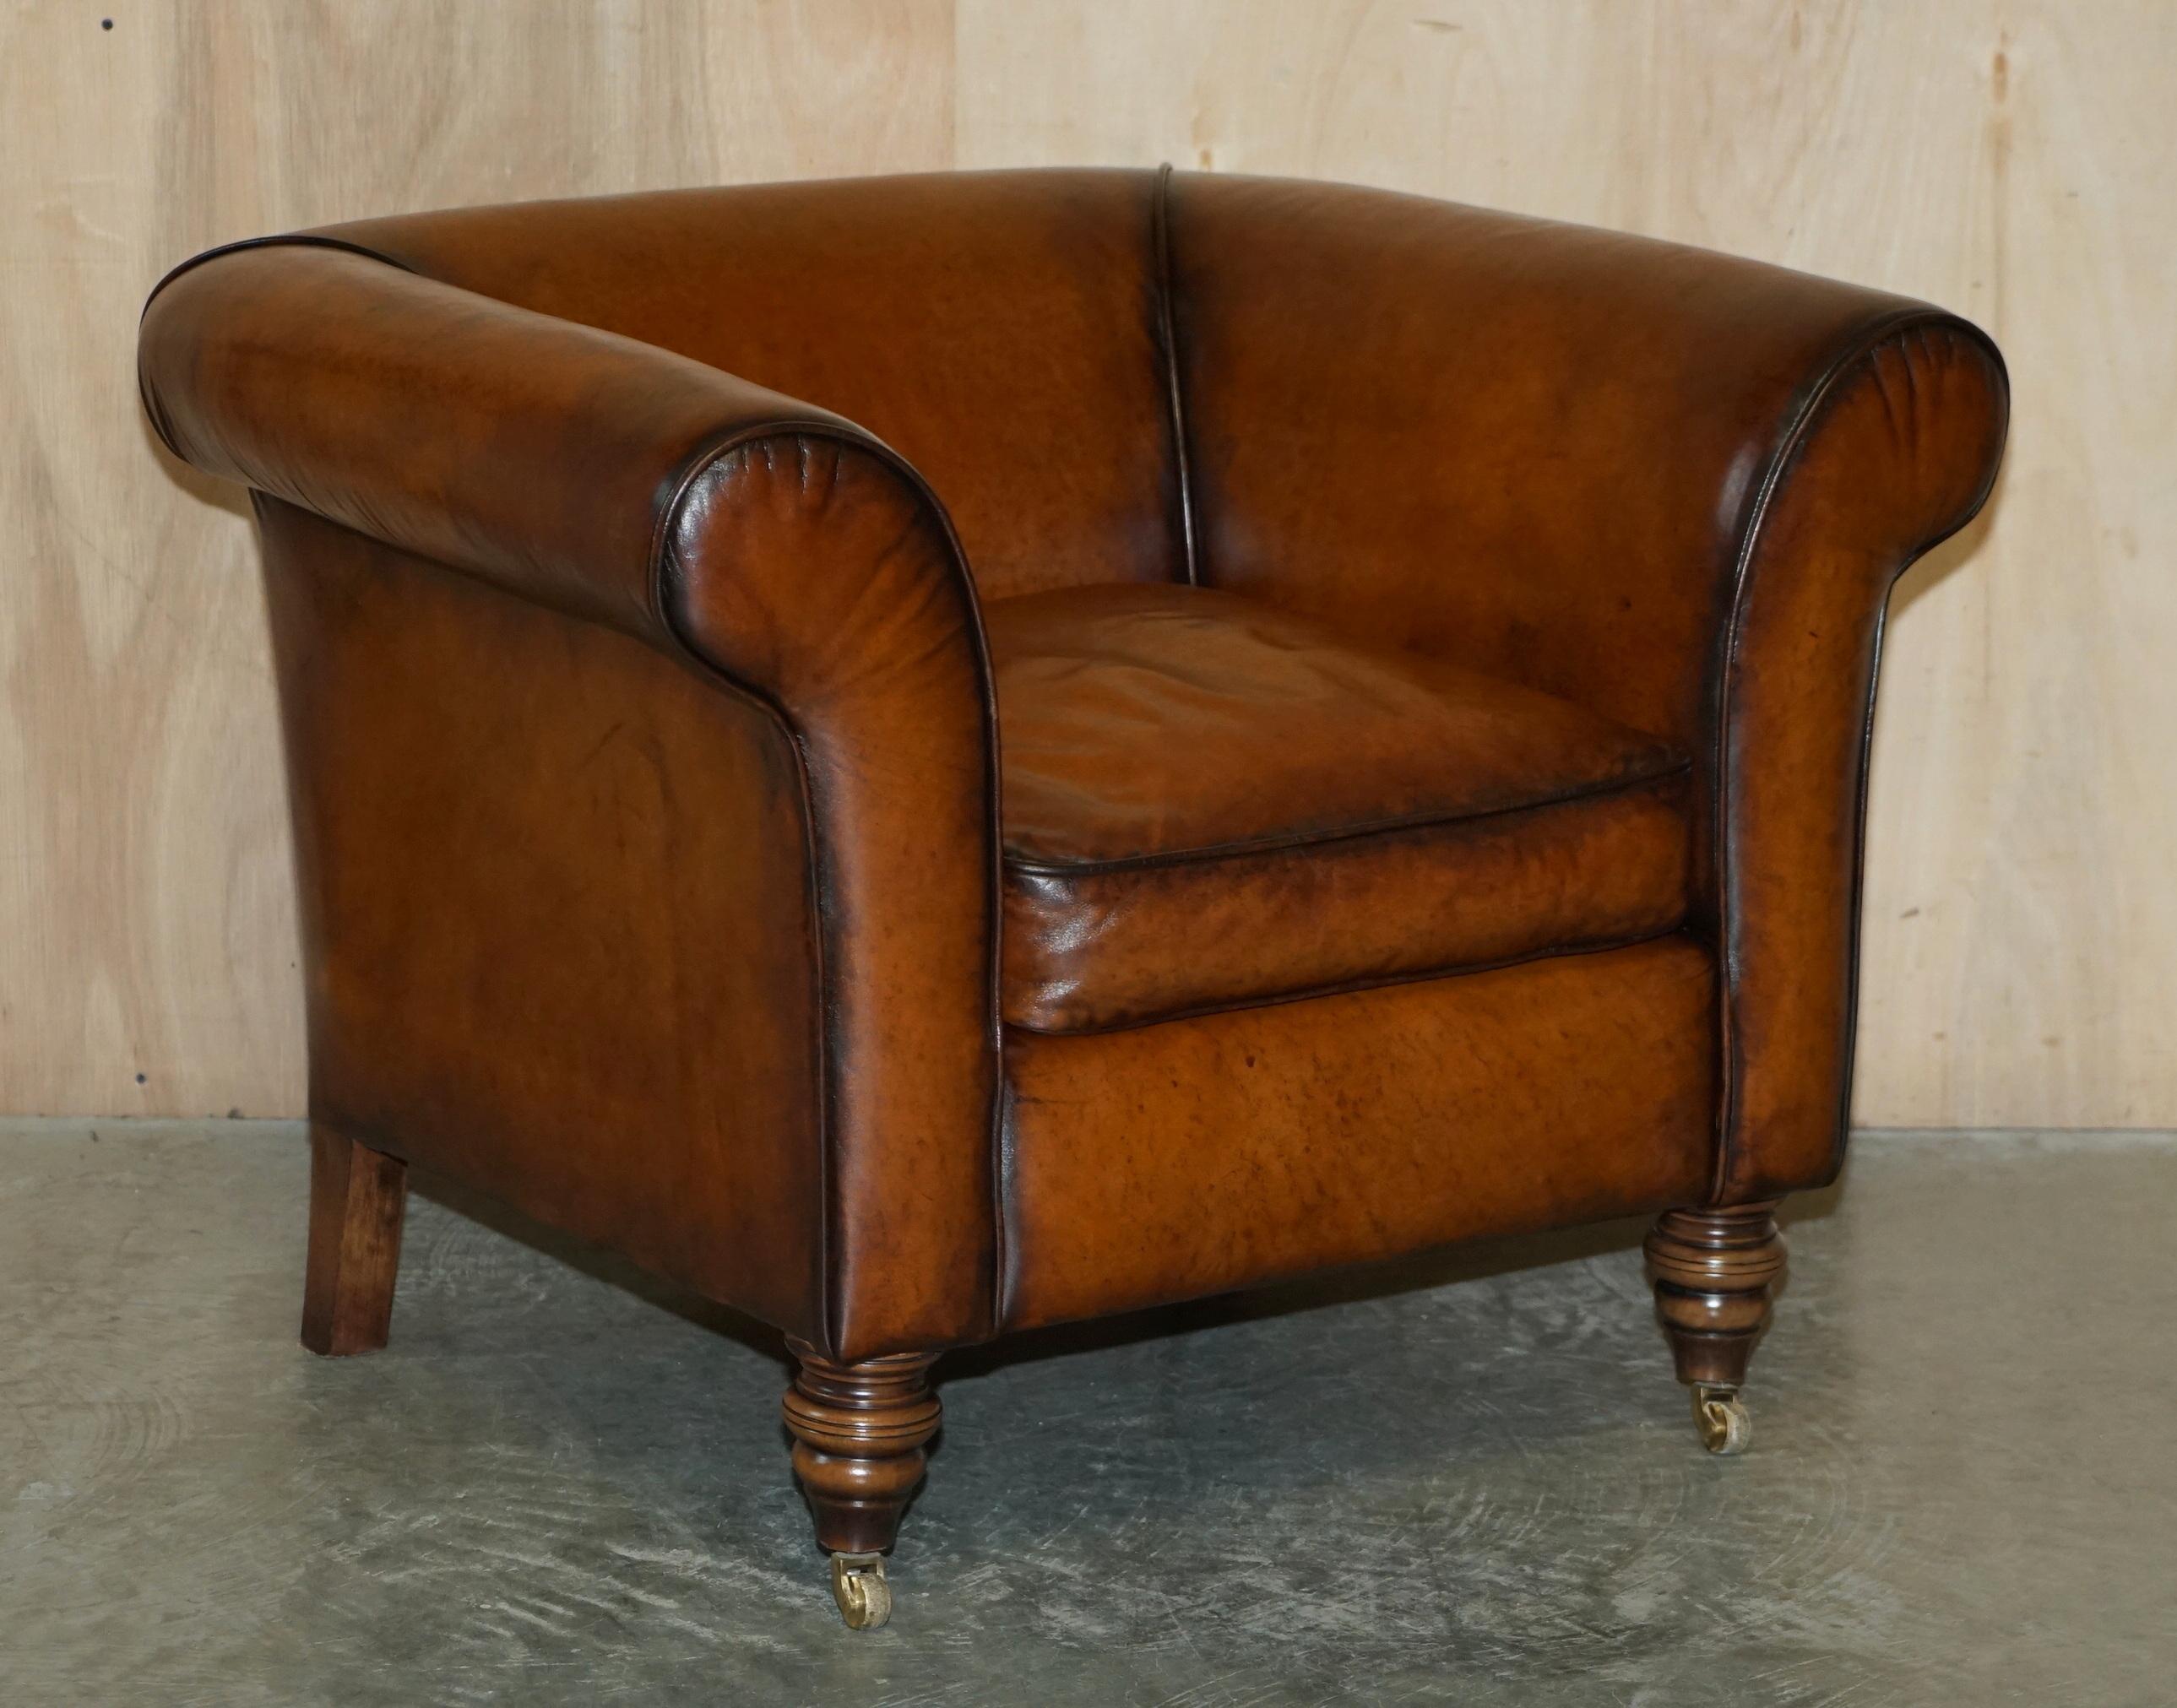 Royal House Antiques

Royal House Antiques is delighted to offer for sale this very well made pair of Vintage Art Deco club armchairs, hand dyed this one of a kind cigar brown colour

Please note the delivery fee listed is just a guide, it covers